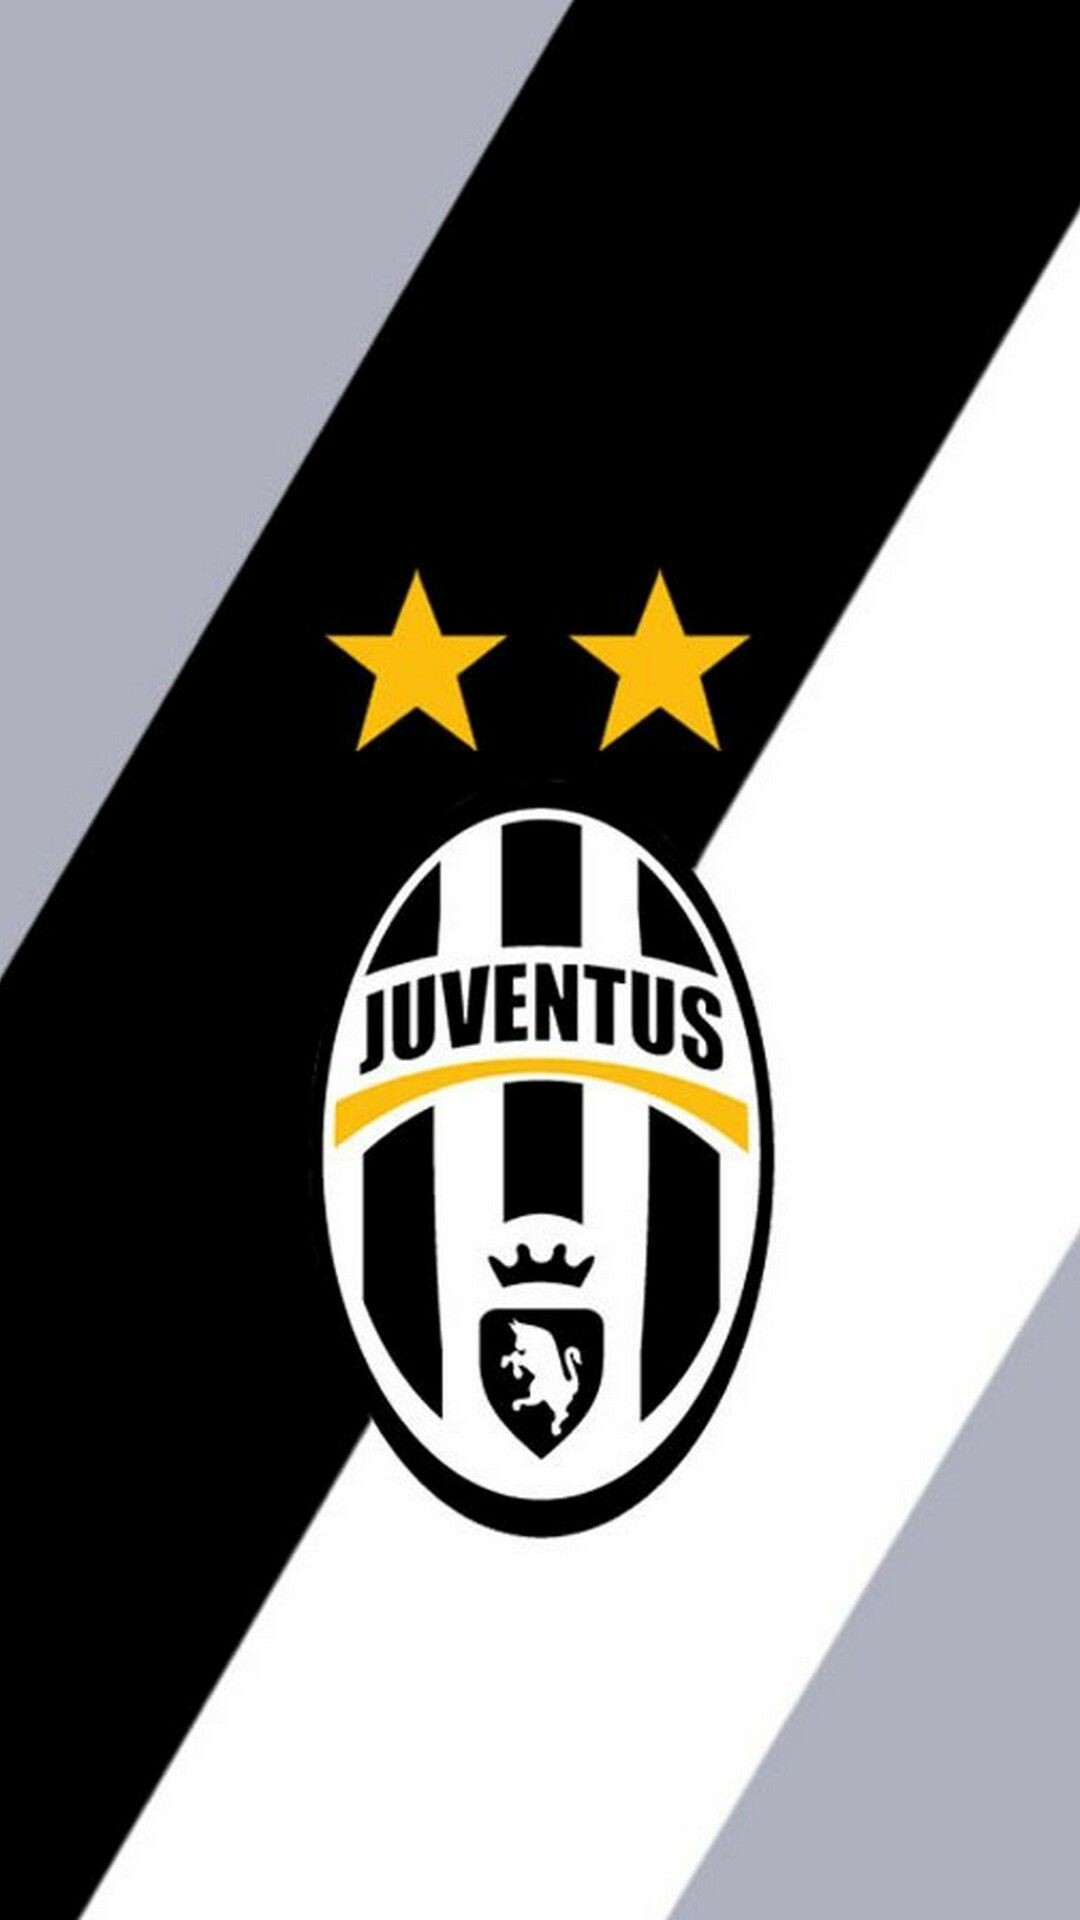 Forza Juve, Juventus Android wallpaper, iPhone wallpaper, Best wallpapers, 1080x1920 Full HD Handy